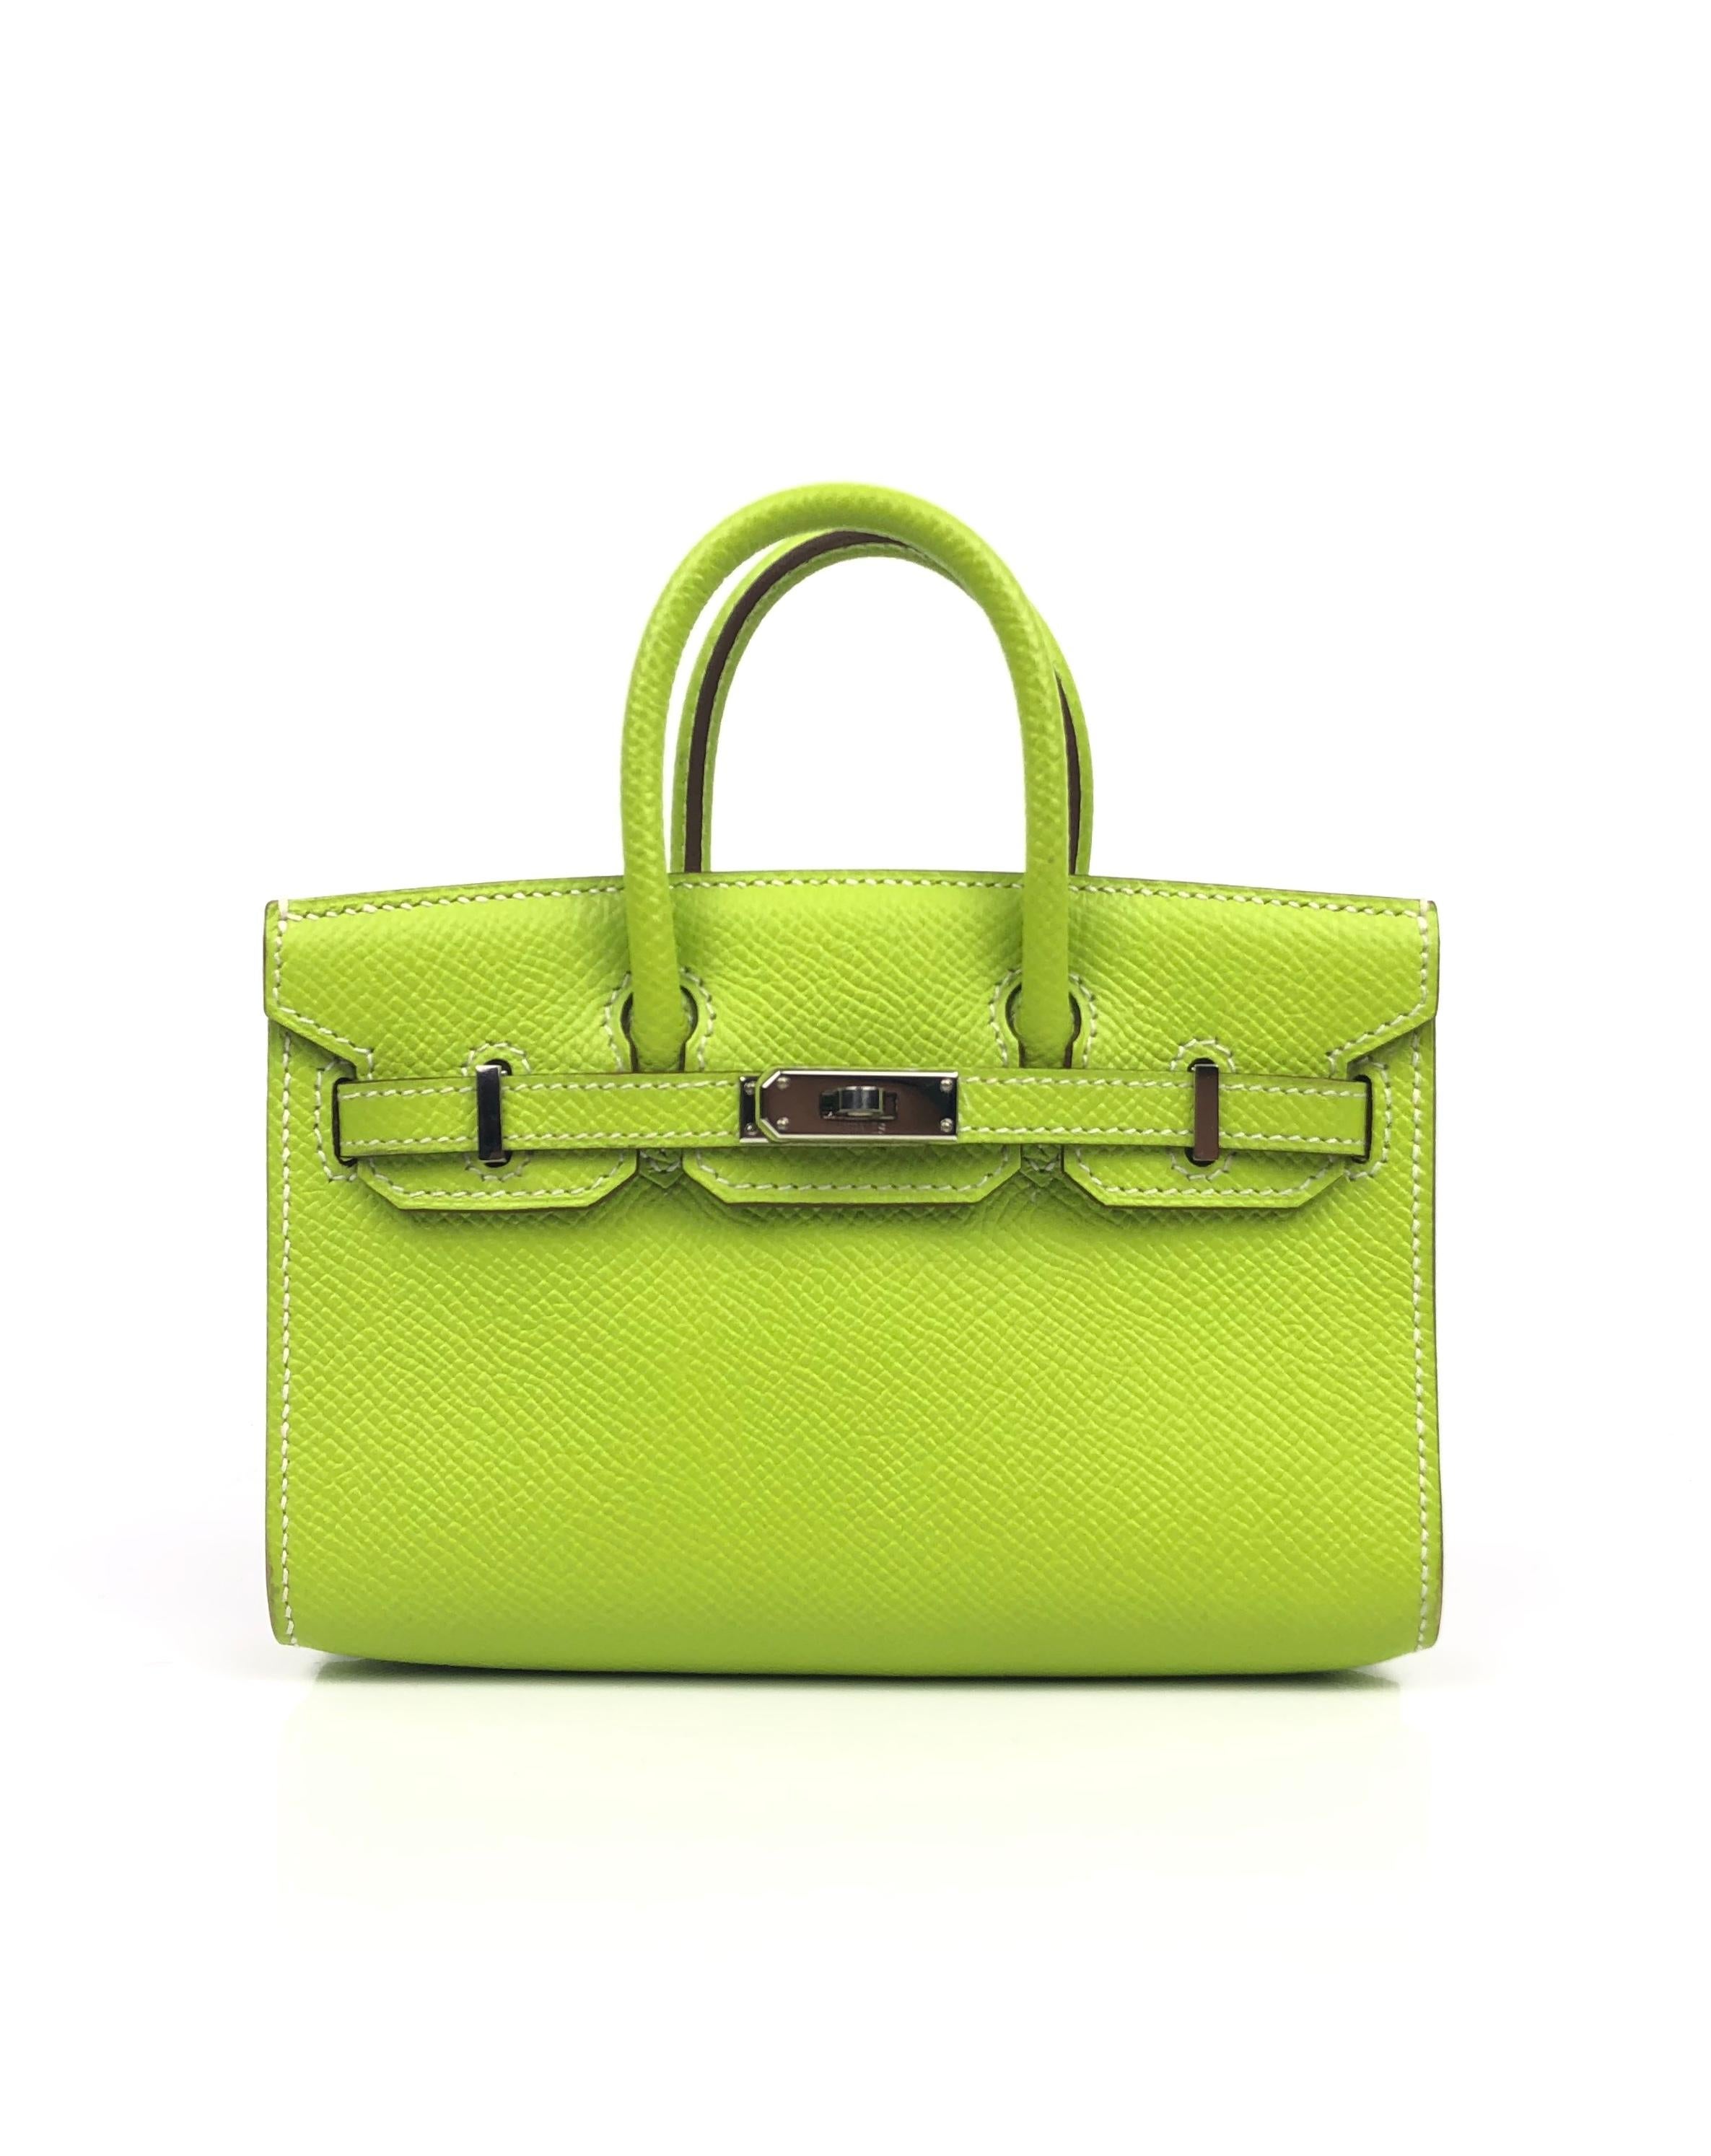 Ultra Rare Limited Edition Hermes Birkin Micro Mini Kiwi Epsom Palladium Hardware With Shoulder Strap. Excellent Pristine Condition. Light Hairlines on Hardware, Perfect corners and structure. Don't miss out on owning this rare limited edition